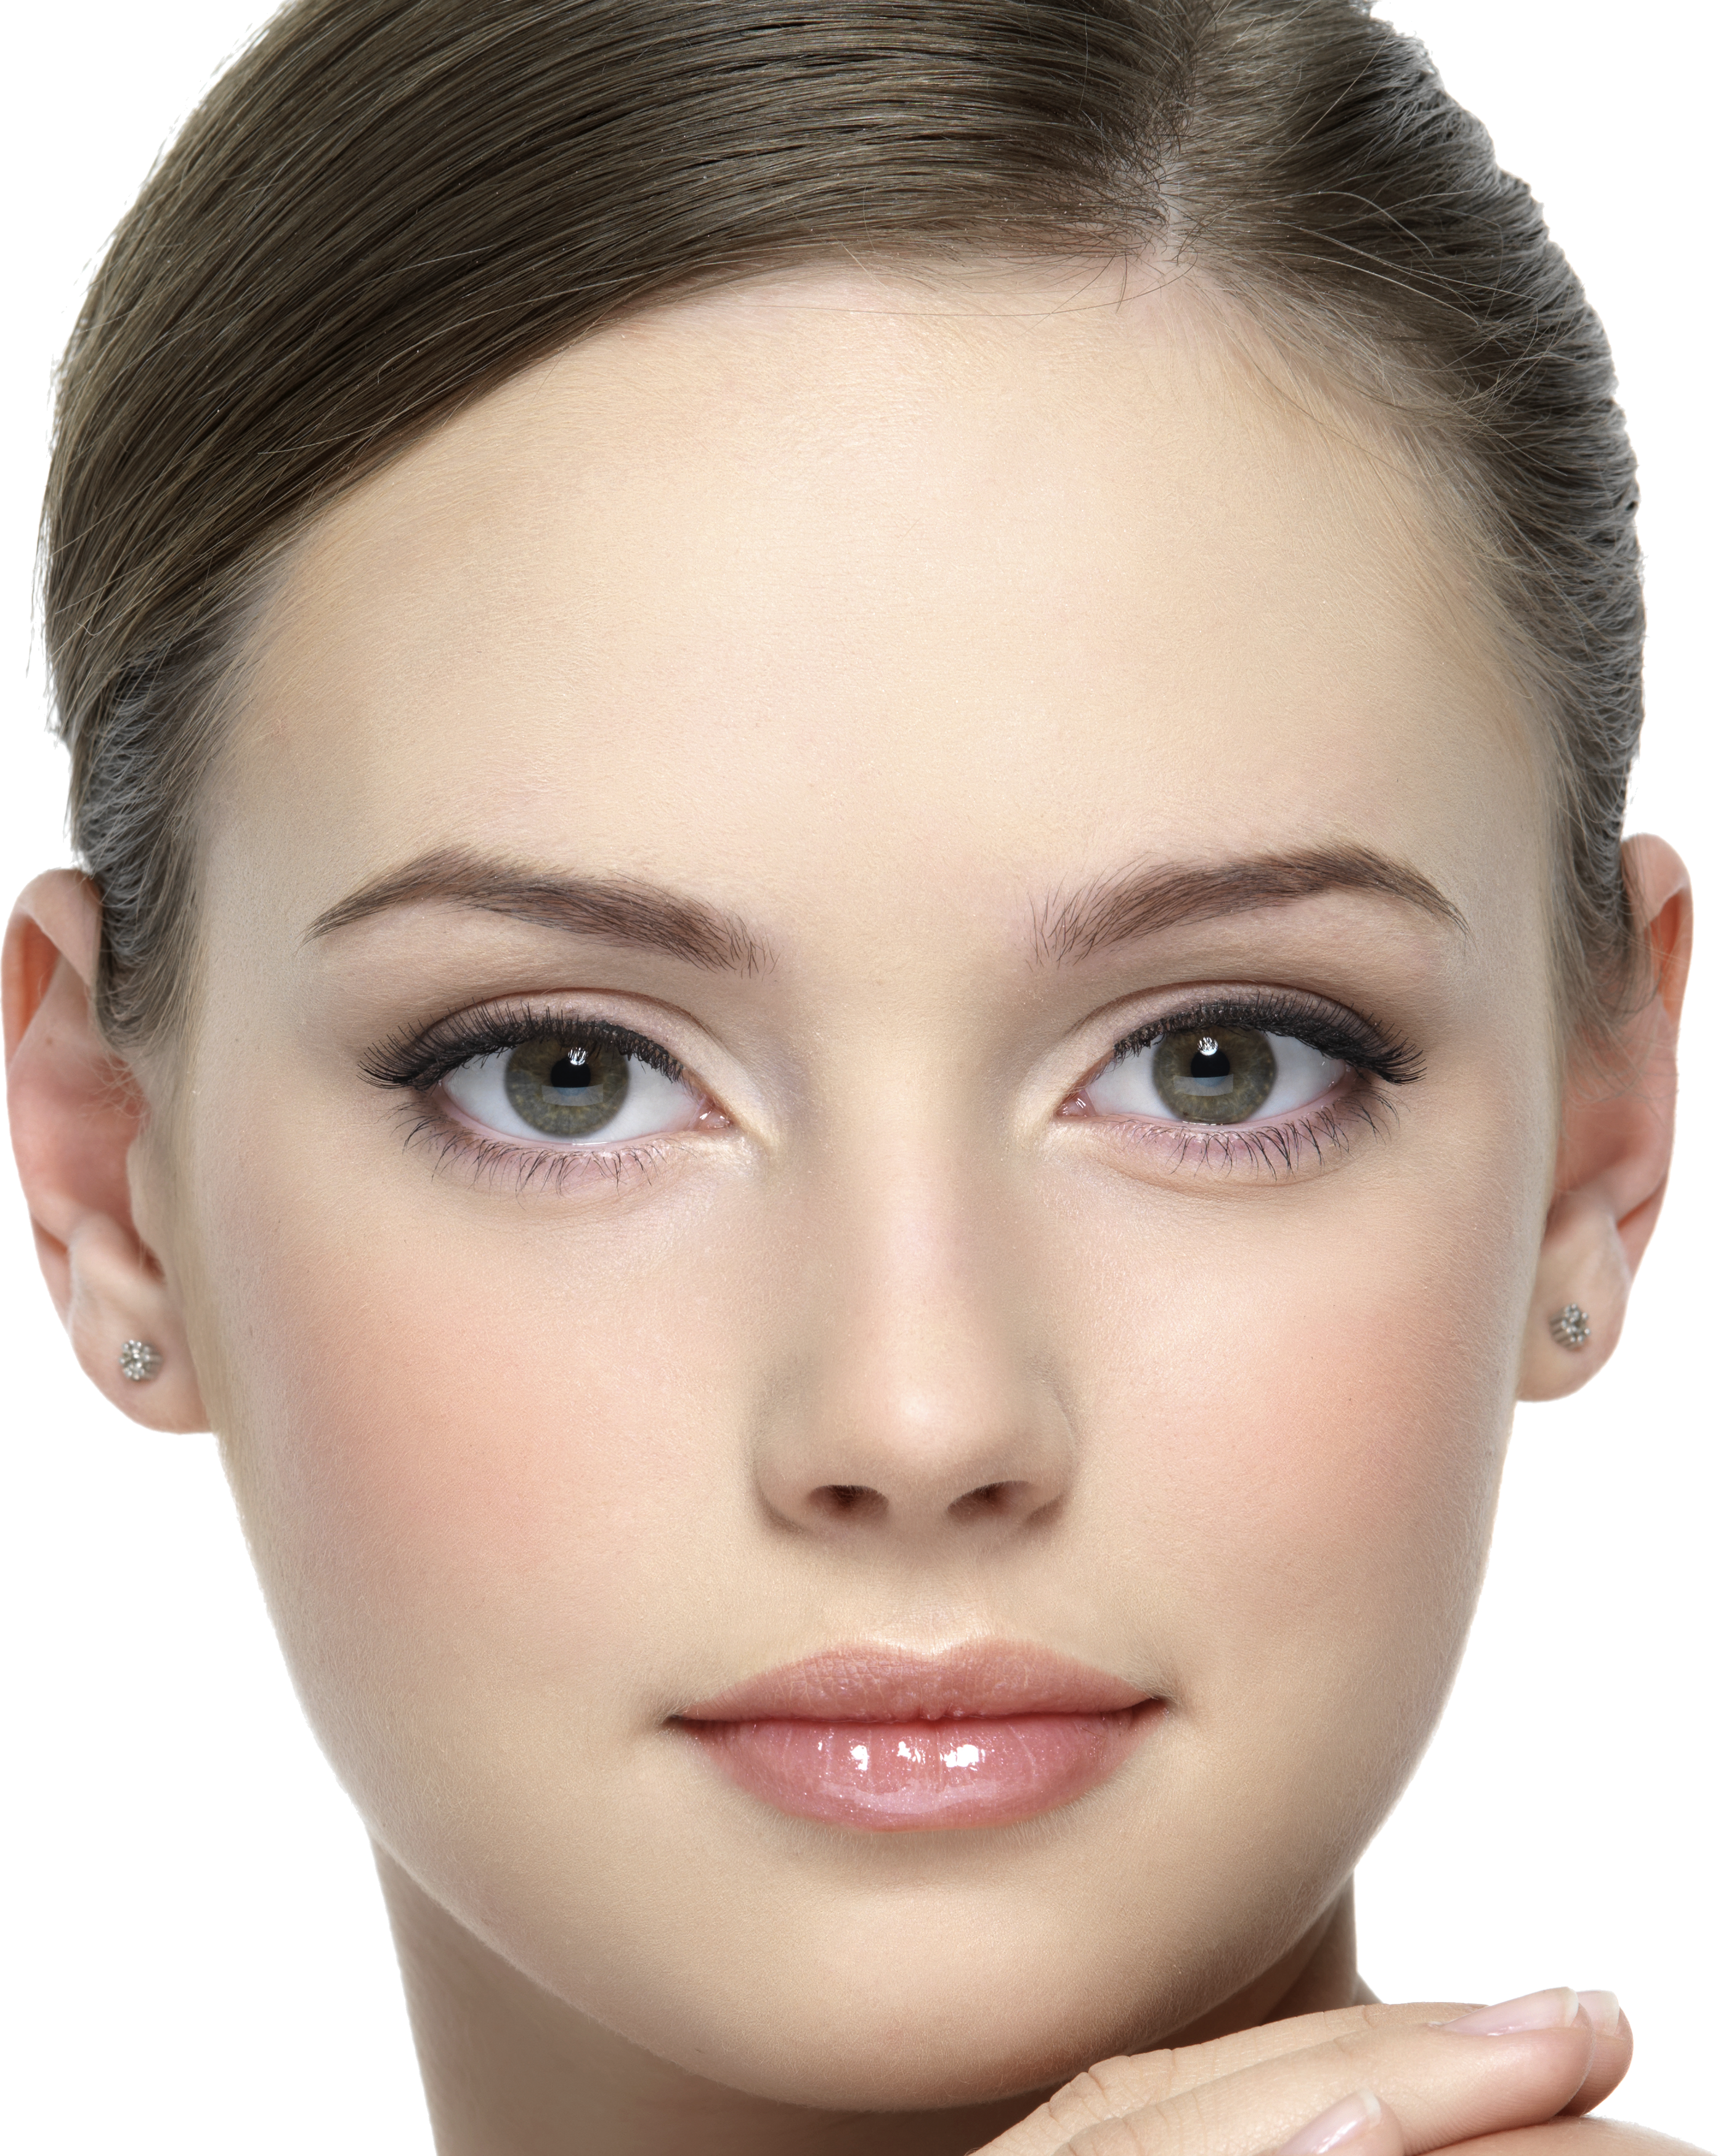 Woman Face Png Image - Face, Transparent background PNG HD thumbnail